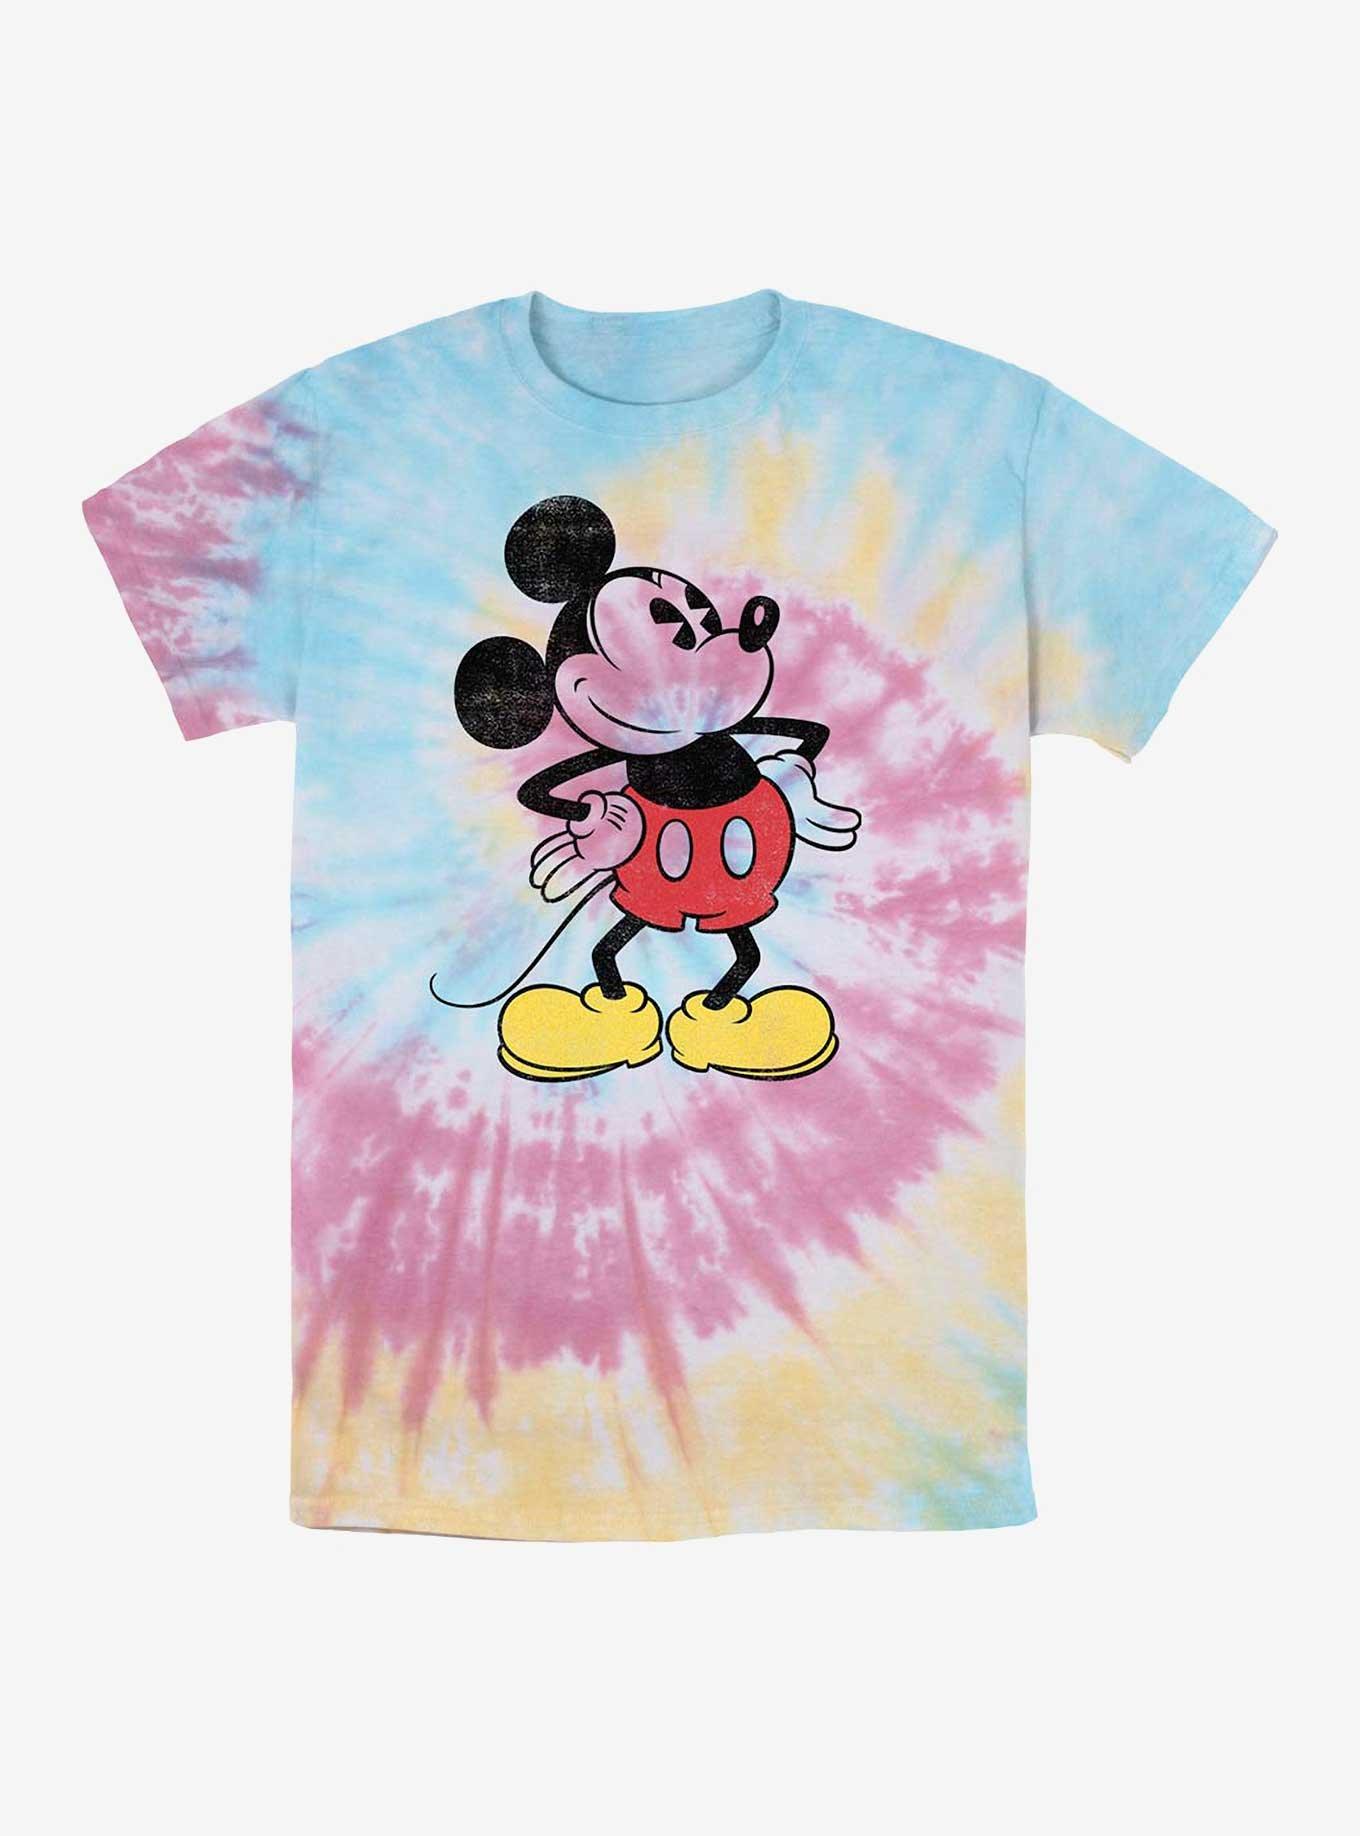 Disney Mickey Mouse Classic Mickey Tie Dye T-Shirt, BLUPNKLY, hi-res